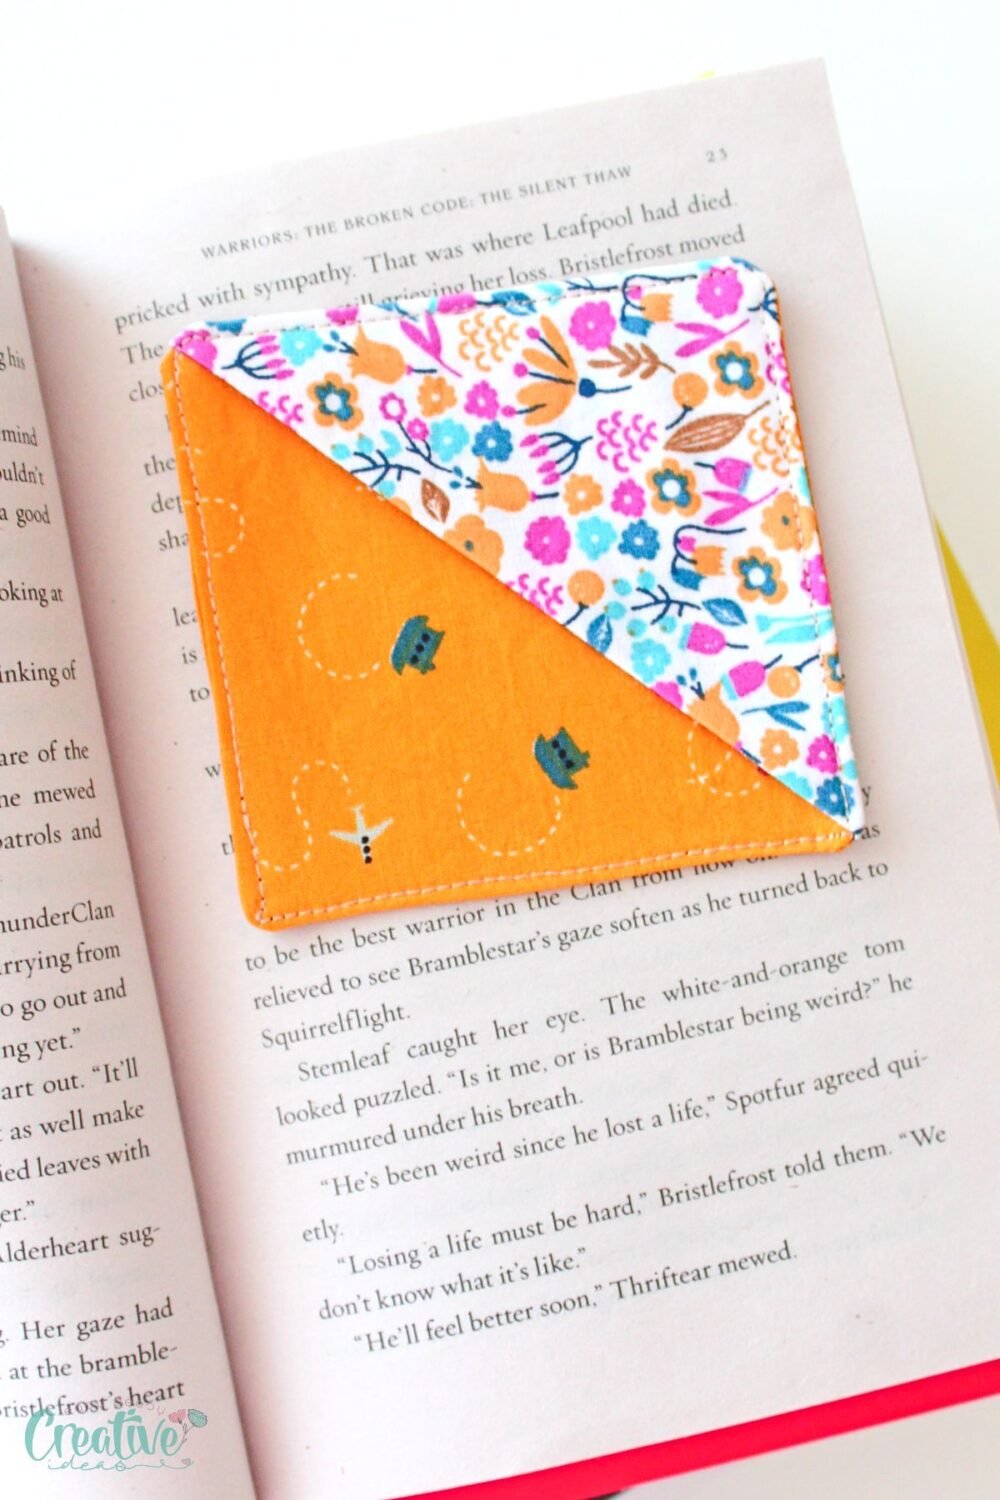 A step-by-step sewing tutorial for fabric corner bookmarks, perfect for book lovers and craft enthusiasts. Learn how to make these cute and handy bookmarks using fabric scraps.